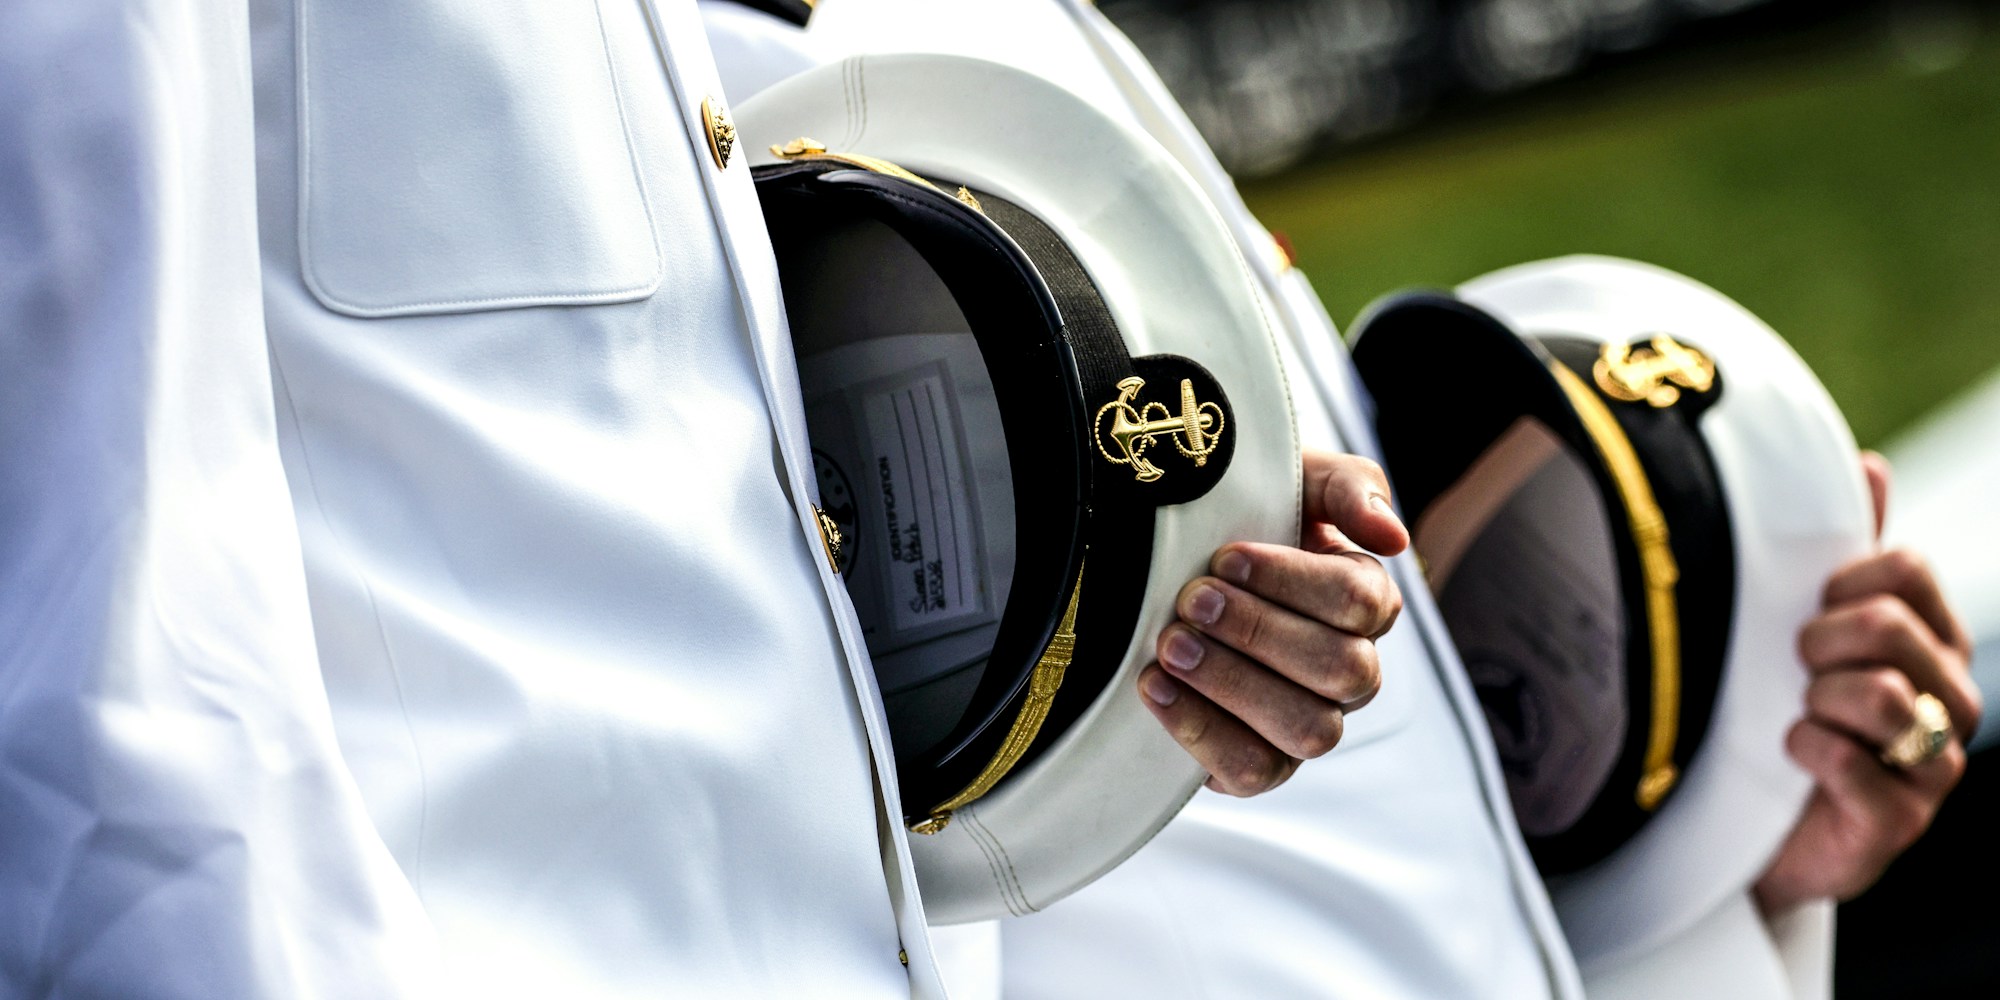 ANNAPOLIS, MARYLAND - MAY 28: Graduating Midshipmen arrive for the U.S. Naval Academy Graduation and Commissioning Ceremony at the Naval Academy on May 28, 2021 in Annapolis, Maryland. The graduating class of 1,084 will be commissioned as ensigns in the Navy or second lieutenants in the Marine Corps. (Photo by Kevin Dietsch/Getty Images)